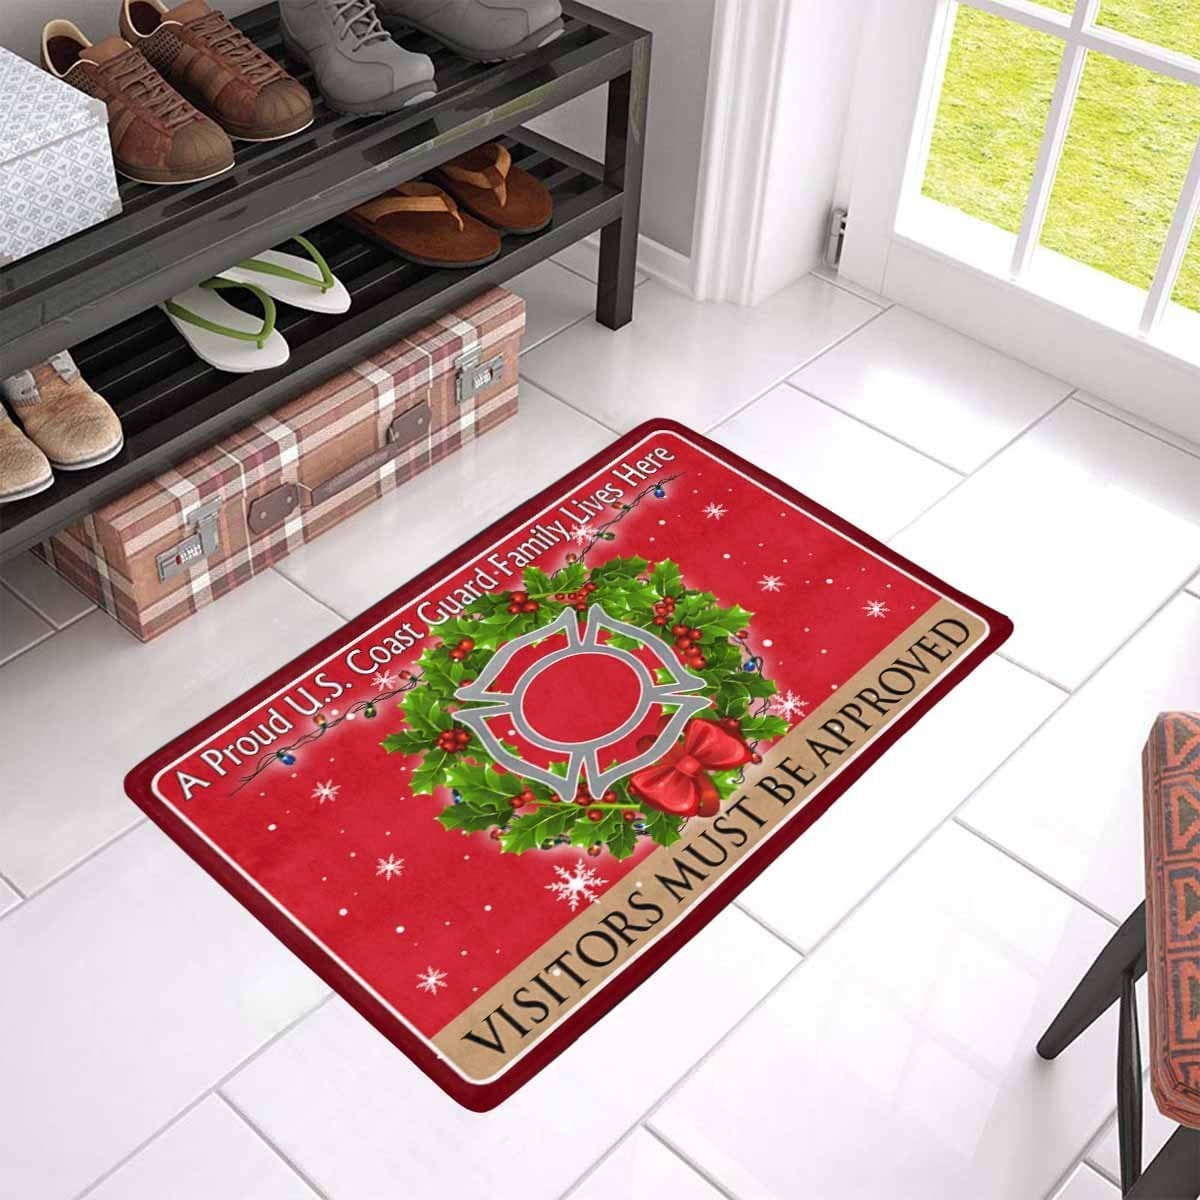 US Coast Guard Fire and Safety Specialist FF Logo - Visitors must be approved Christmas Doormat-Doormat-USCG-Rate-Veterans Nation